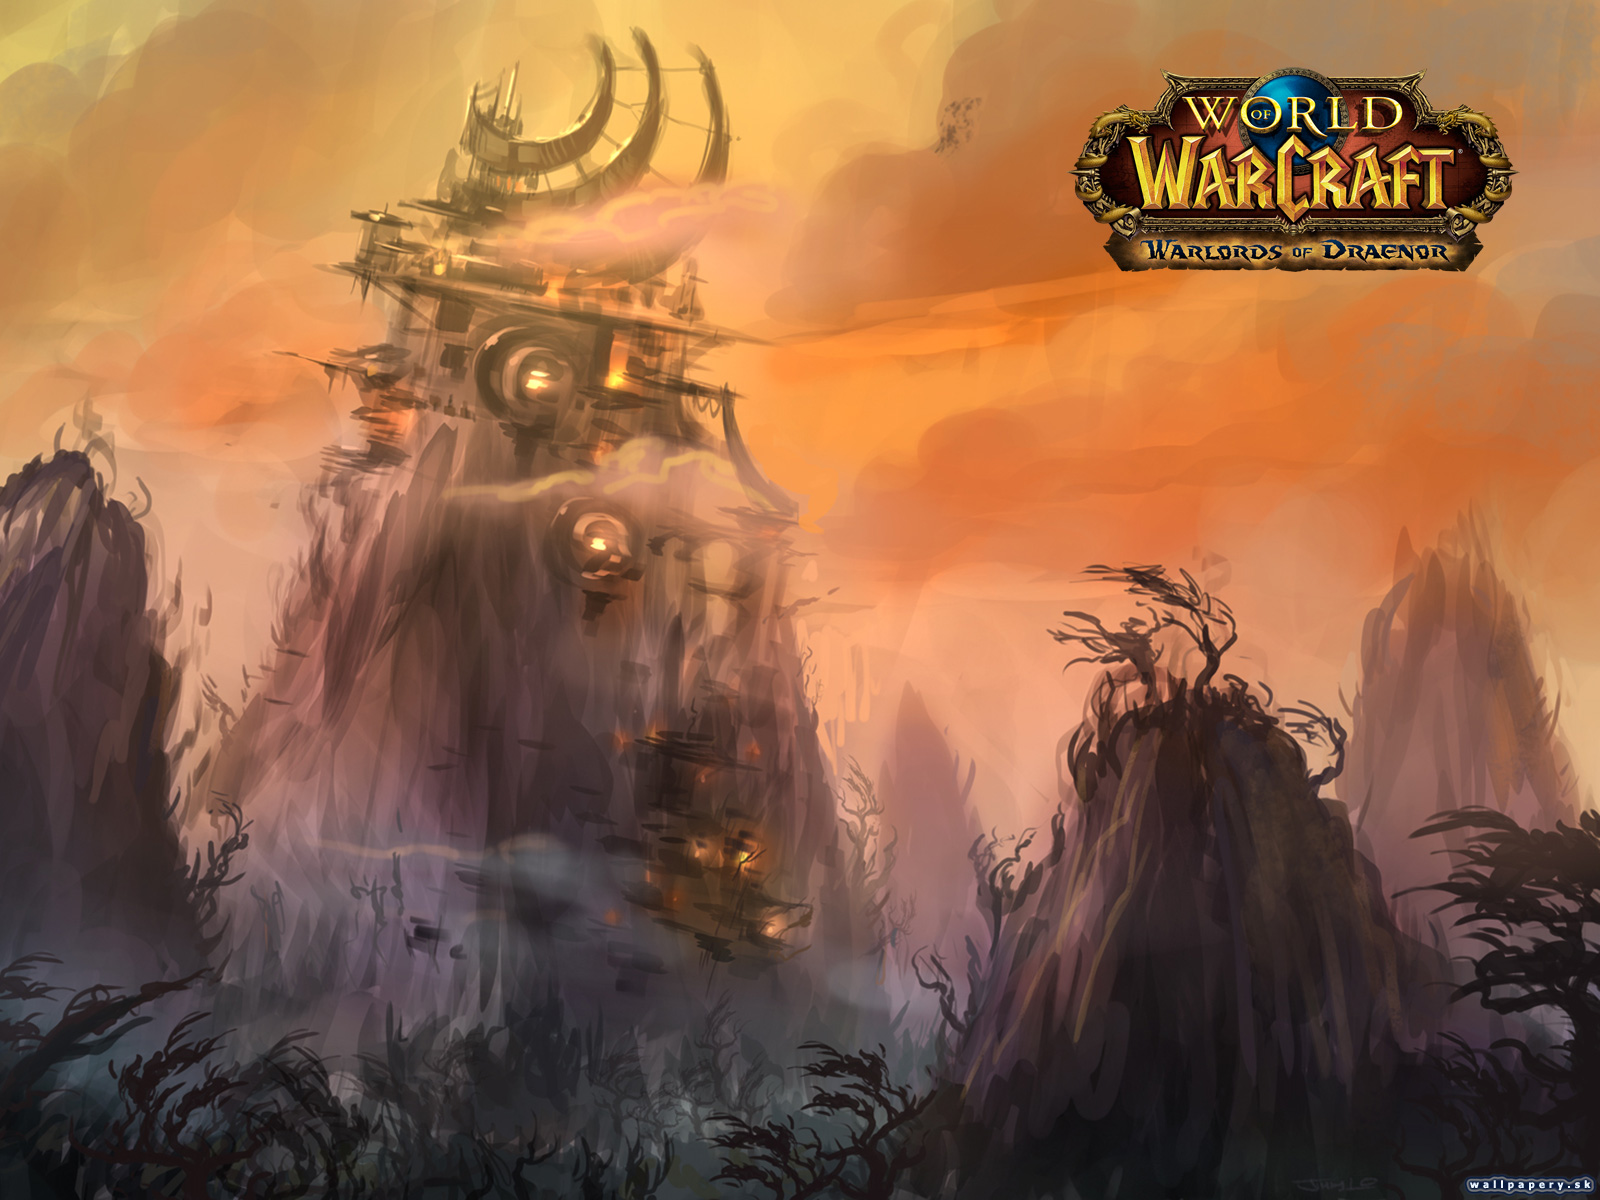 World of Warcraft: Warlords of Draenor - wallpaper 3